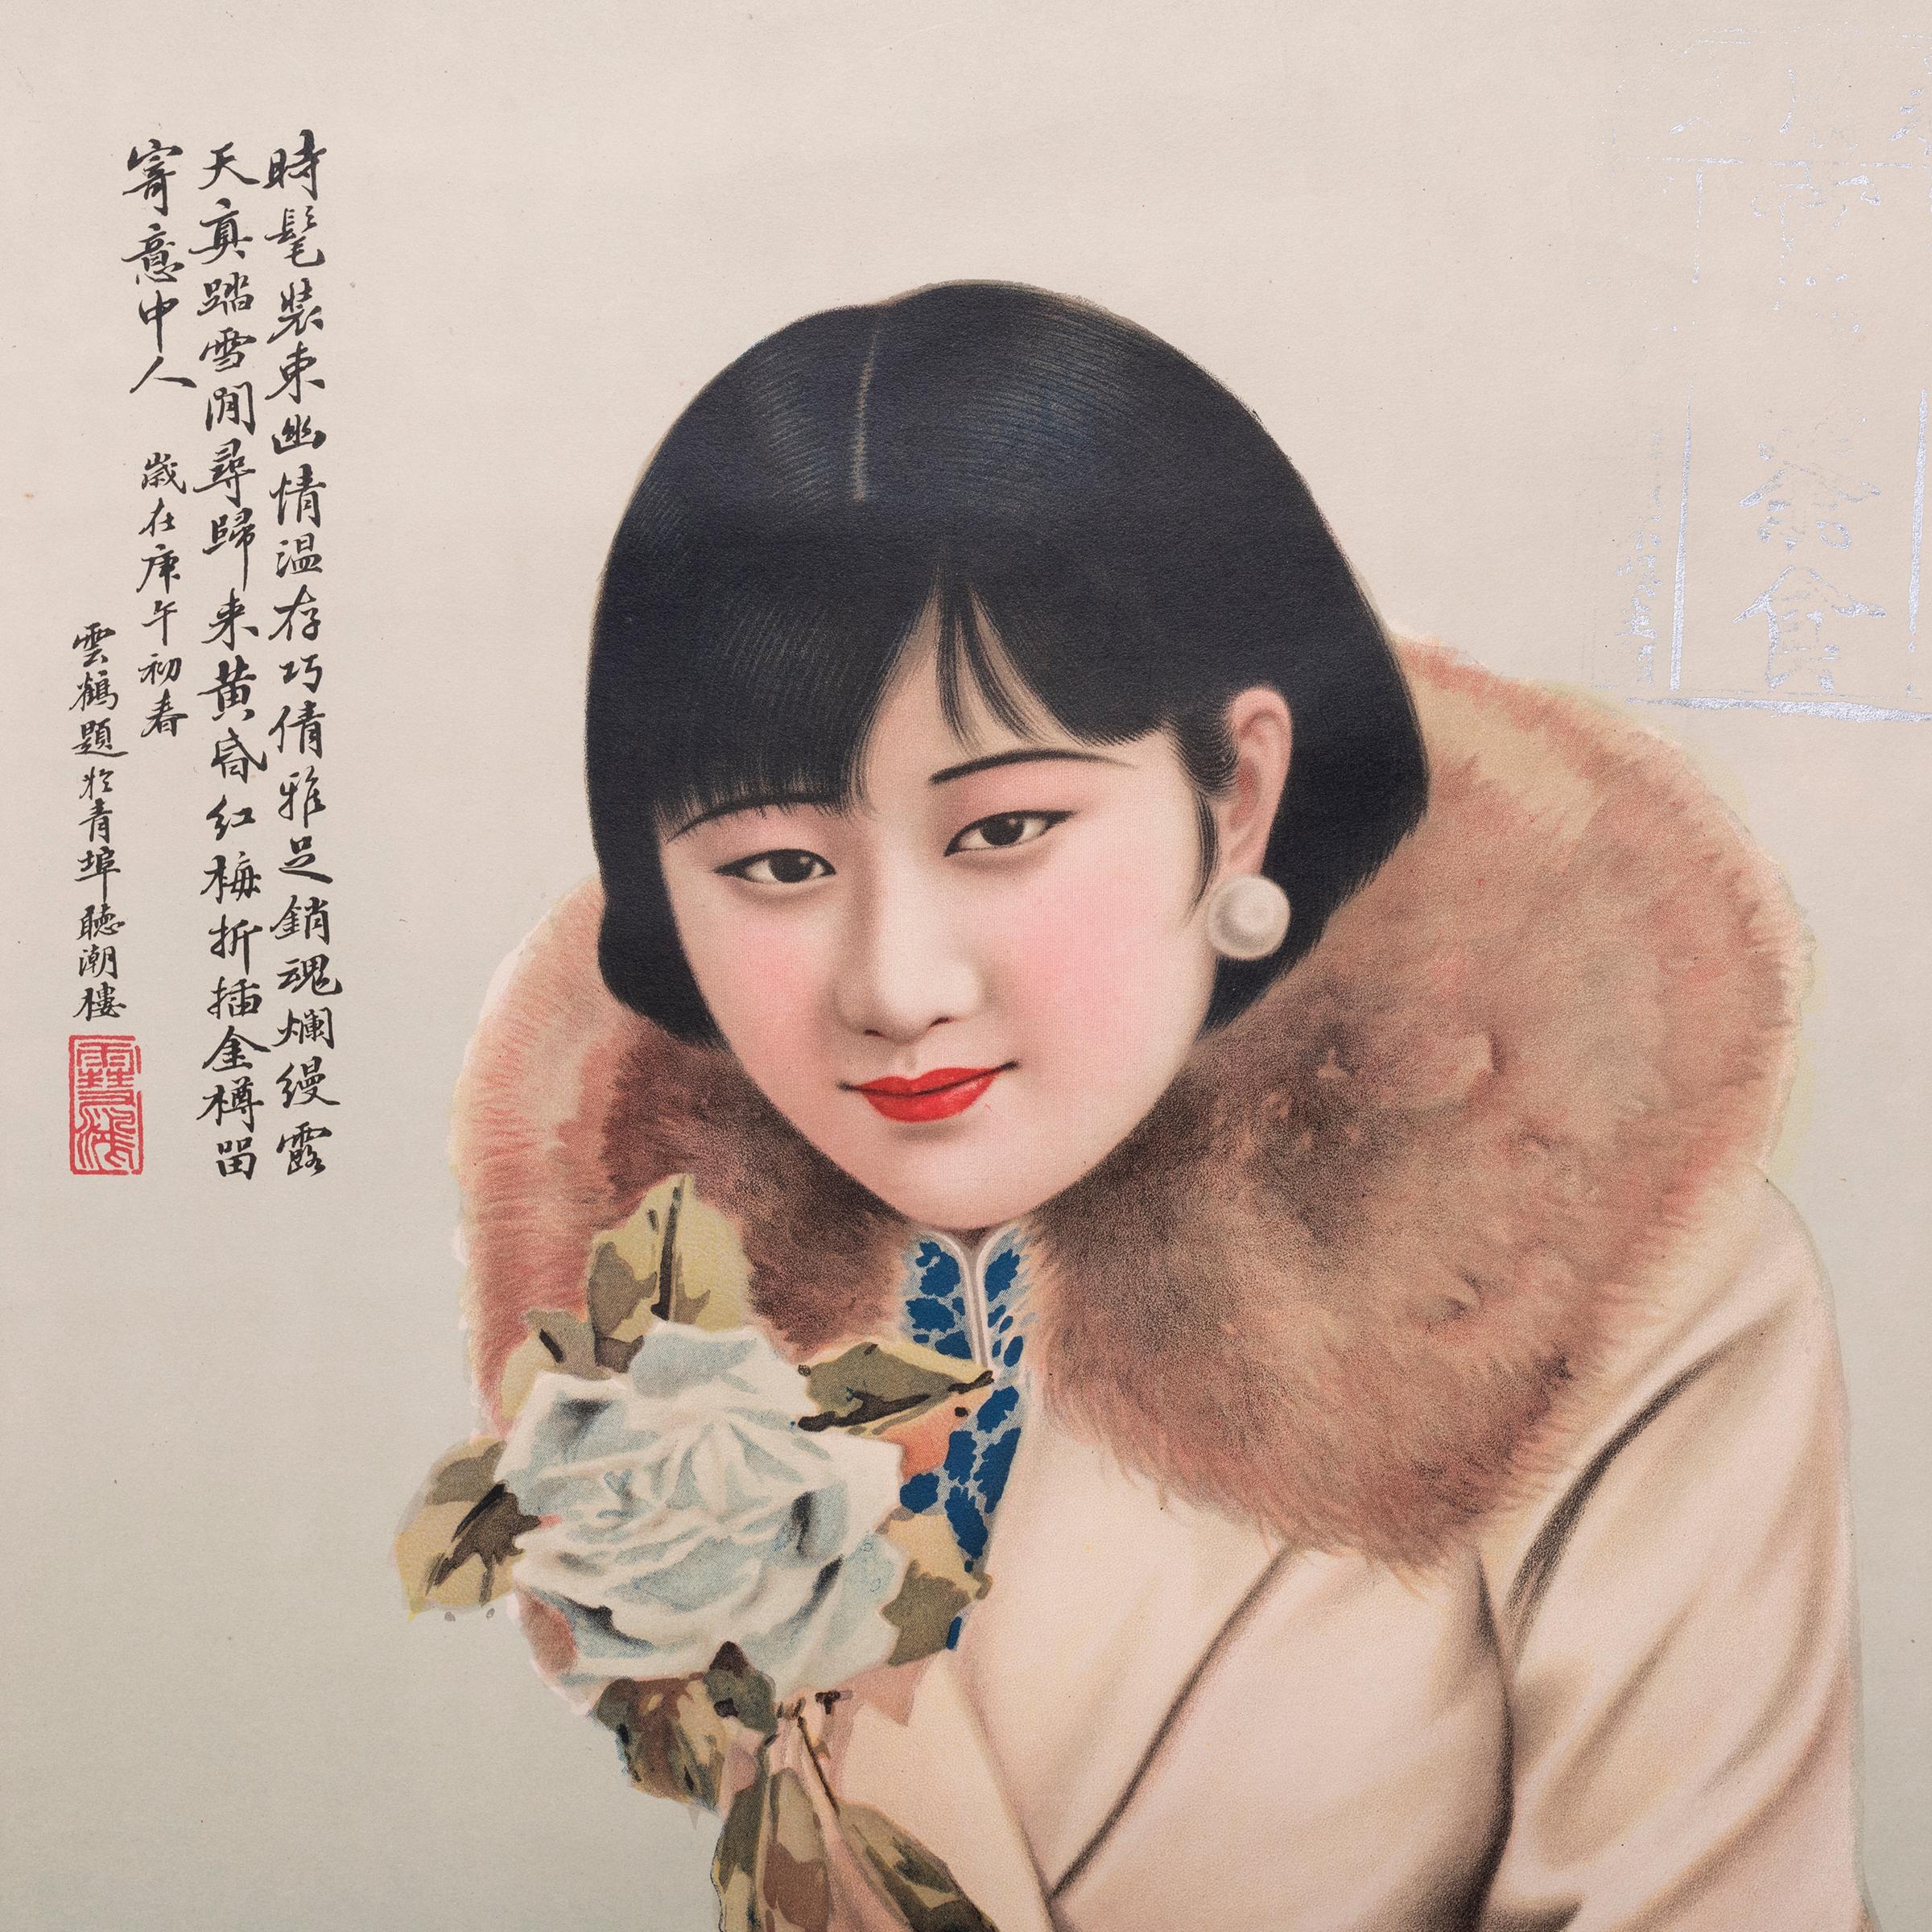 This commercial advertisement poster from 1930s Shanghai melds the meticulous detail of traditional Chinese painting with the craft of color lithography. Large companies often presented posters such as this to their clients to commemorate the